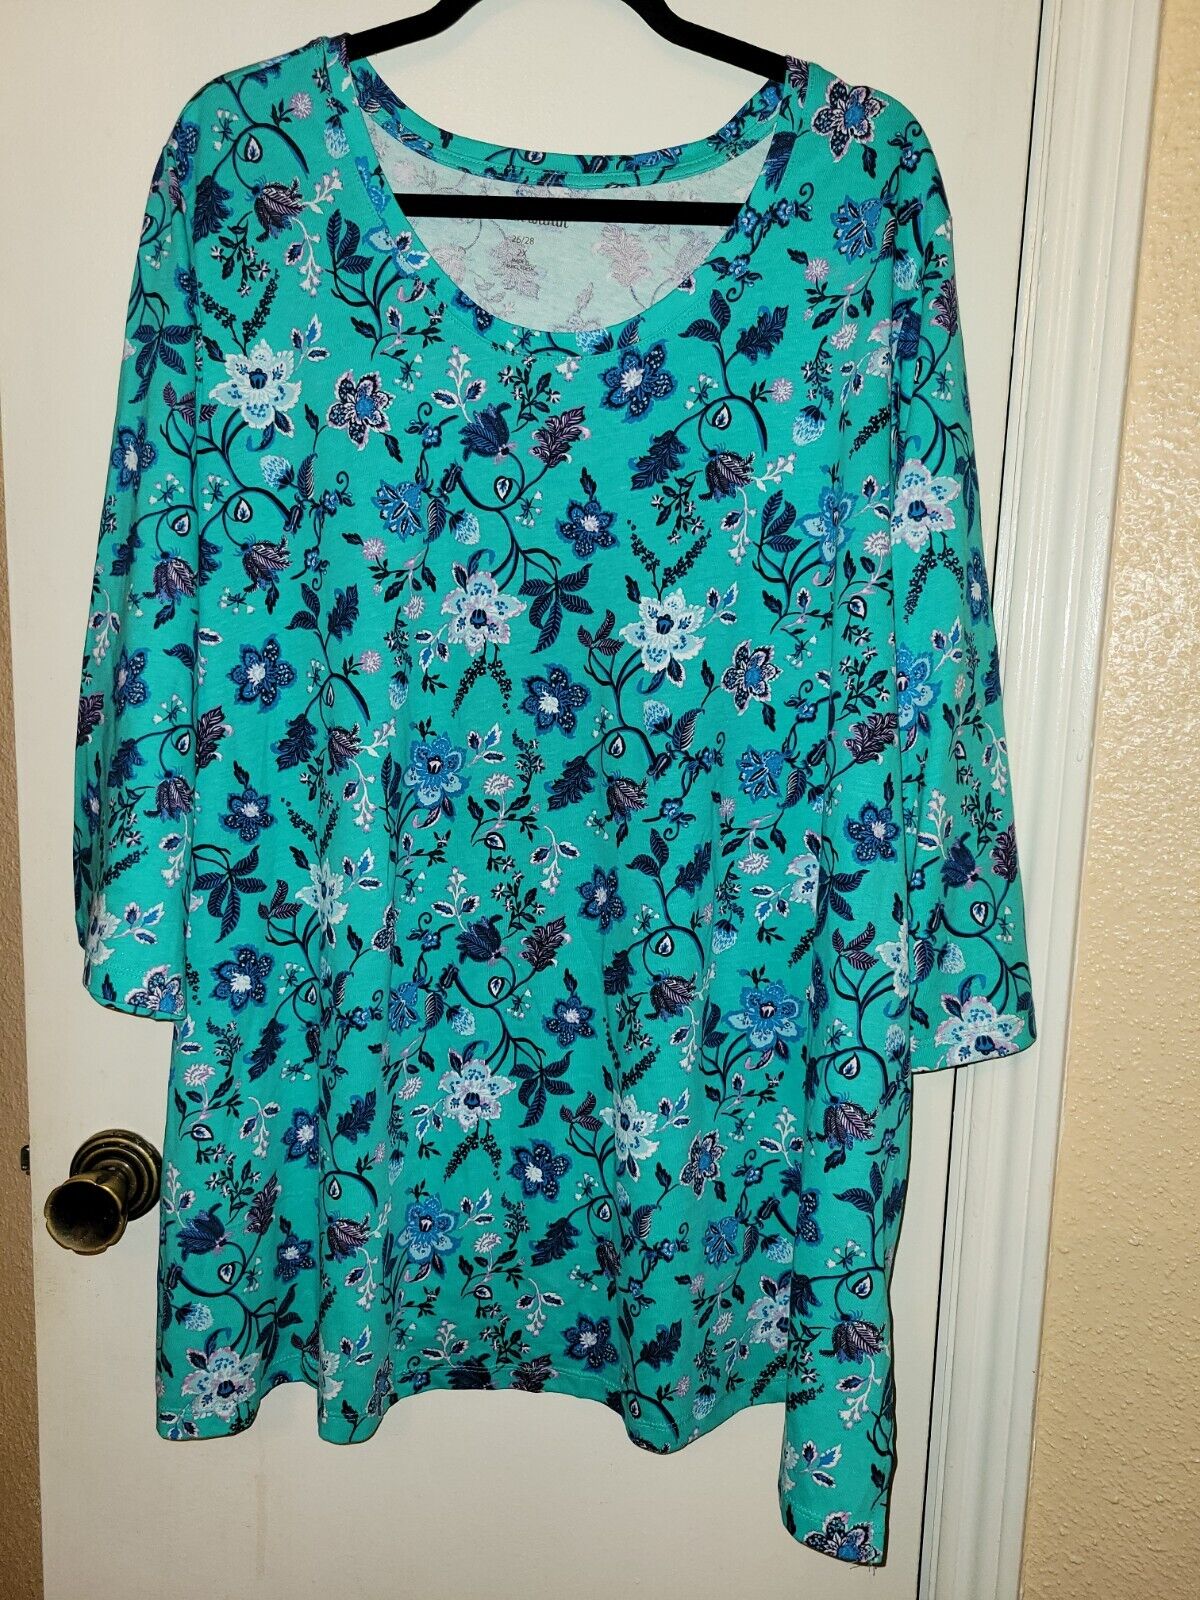 Woman Within teal green floral top shirt plus 2X-26/28 Cotton 100%